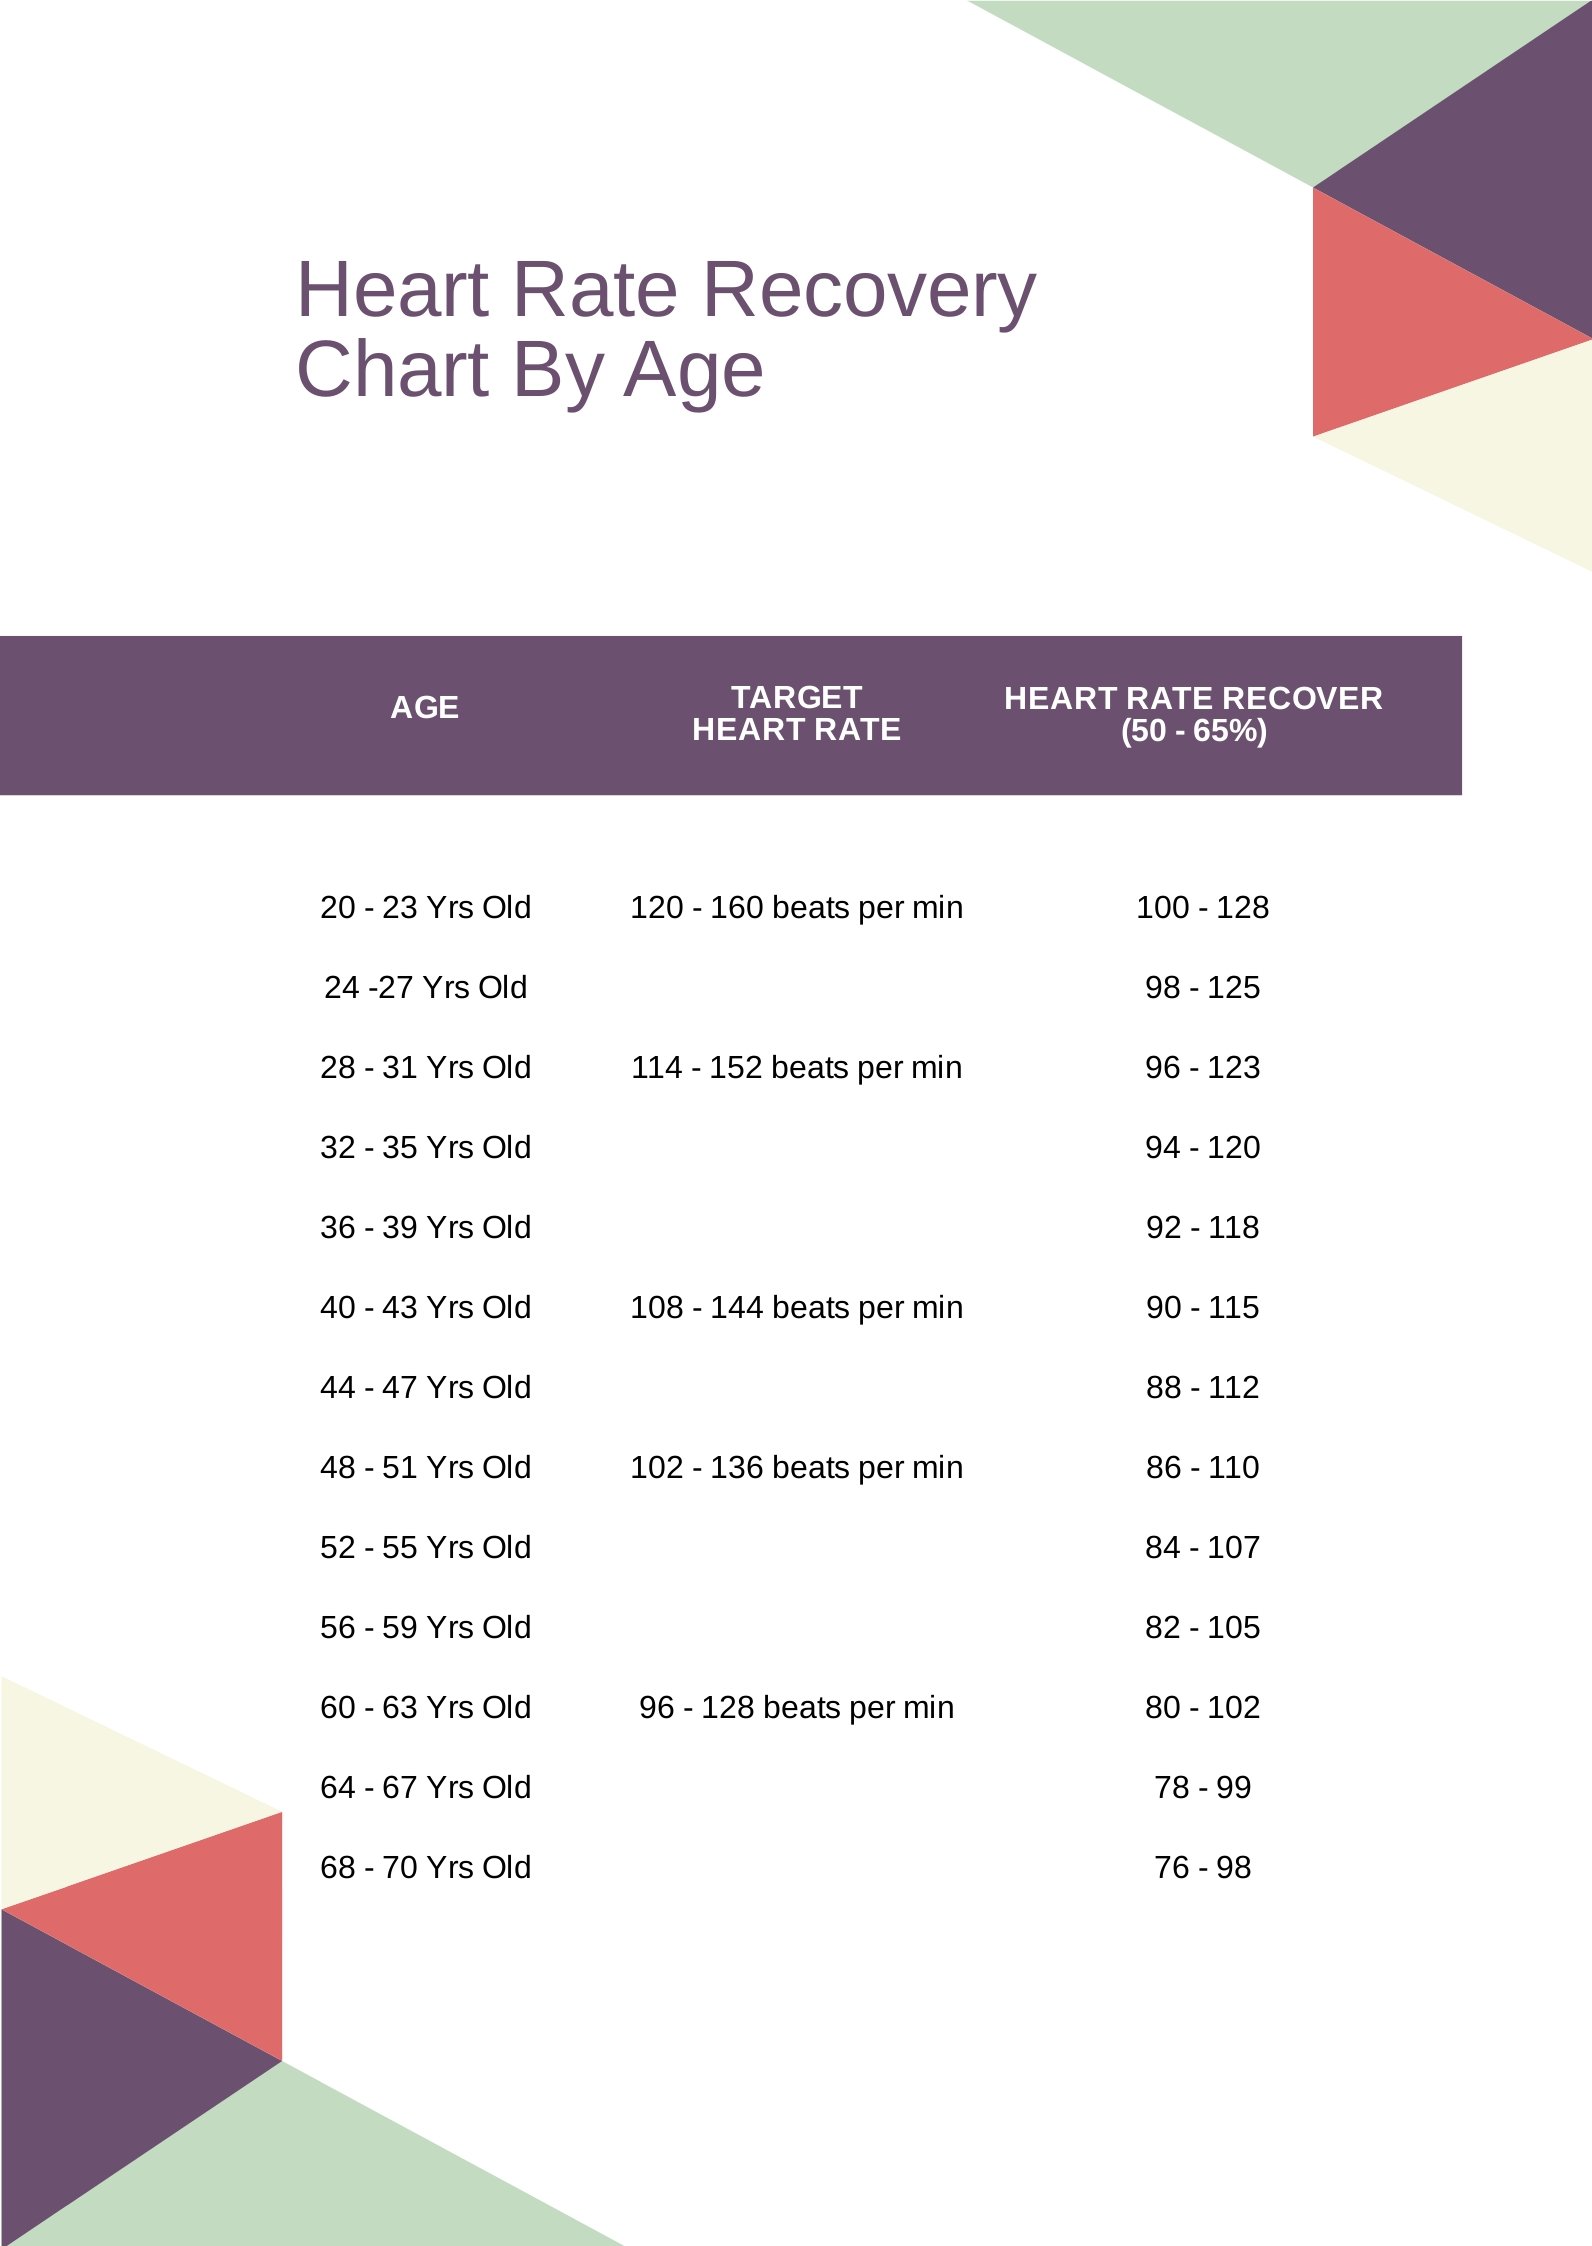 Heart Rate Chart By Age And Gender